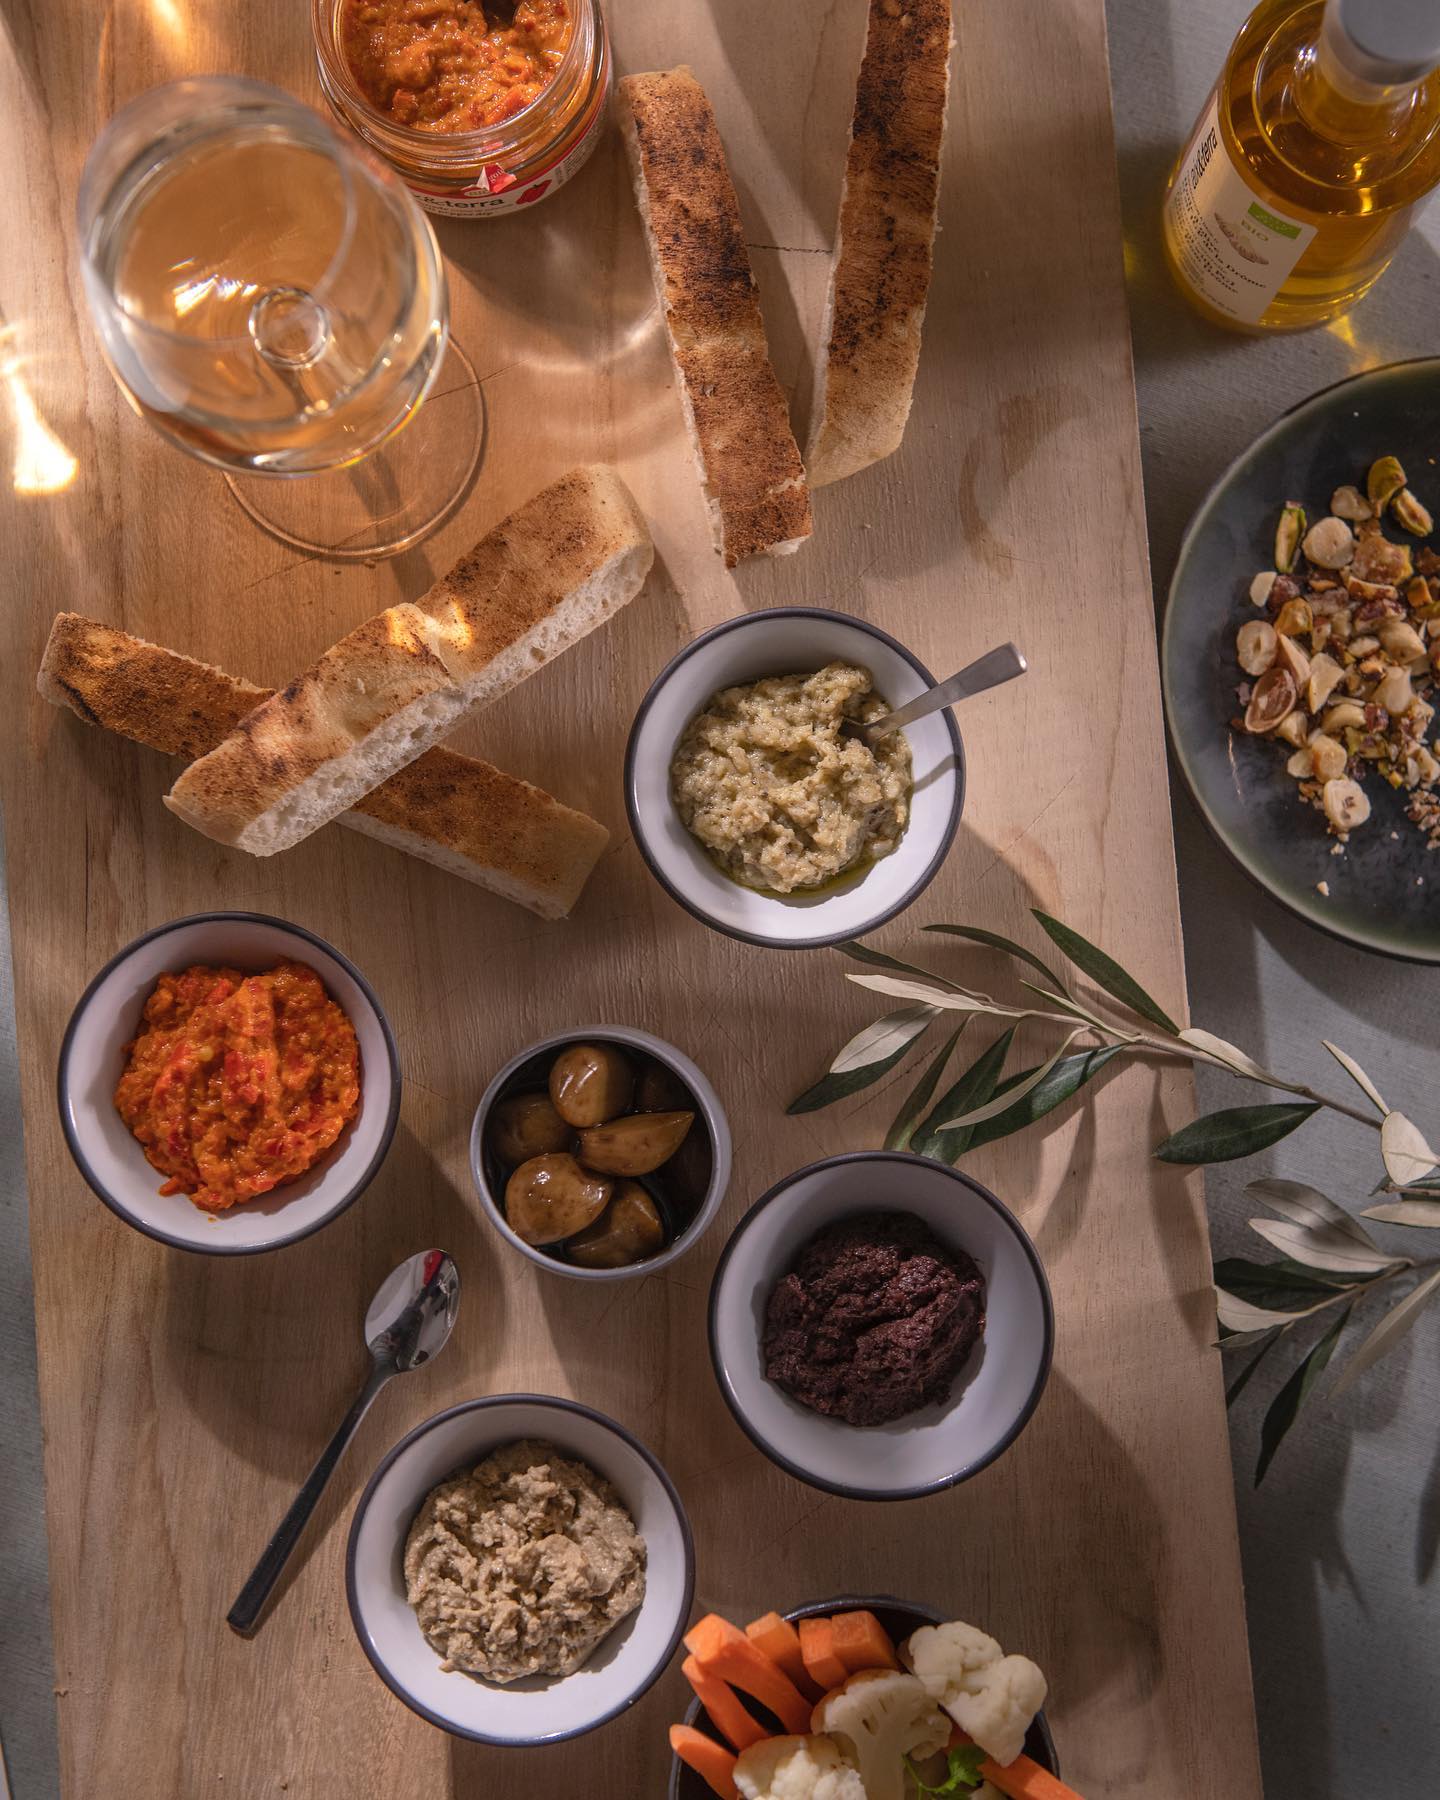 Buy ingredients and snacks from your aperitivo party